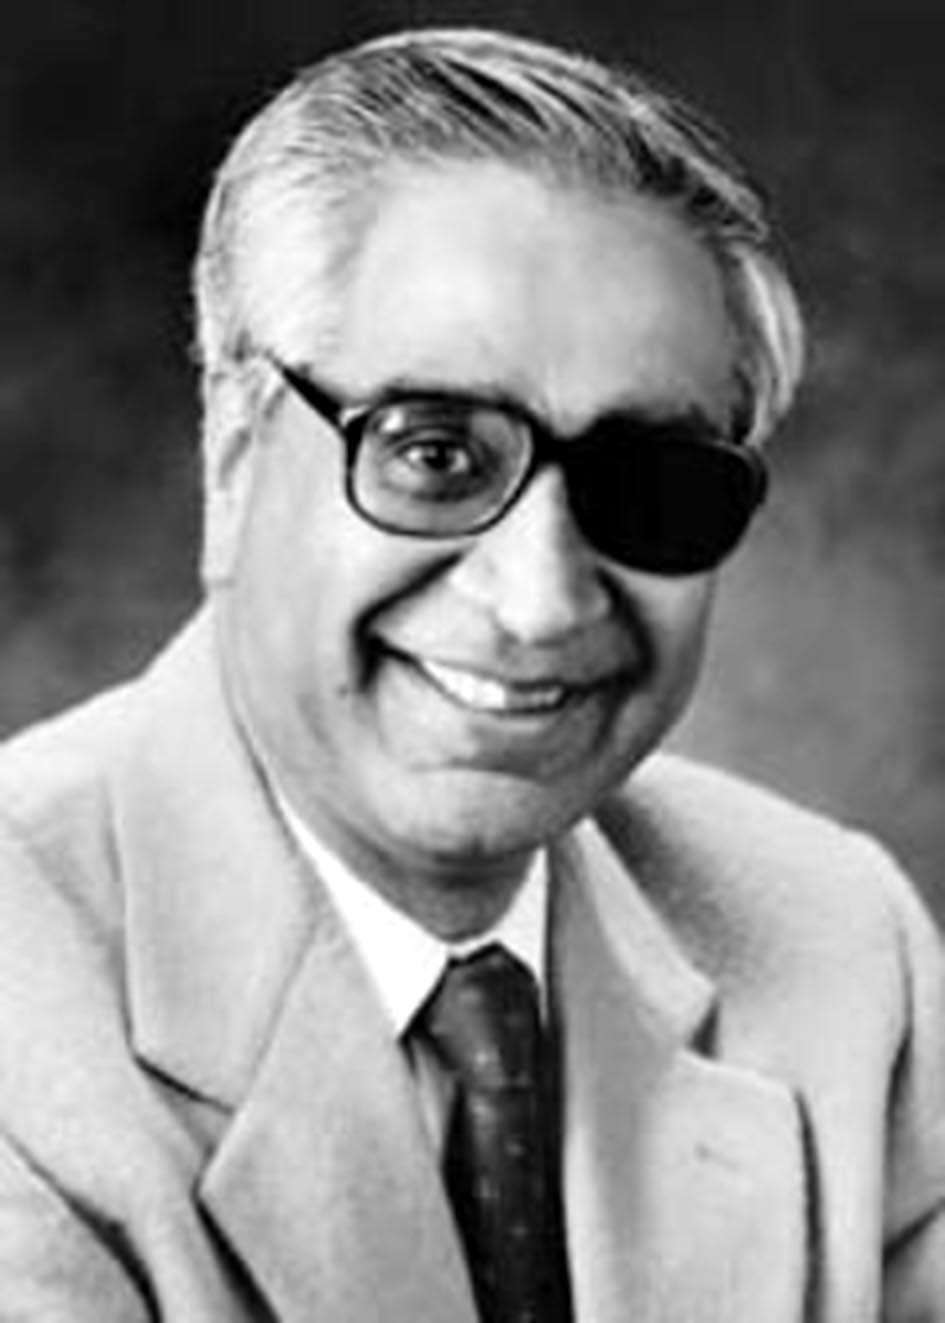 Optics Pranks 311 Pranks: Safety Violations In the early 1970s Bala Manian was a new faculty member in the Institute of Optics setting up his laboratory in the west wing of the fourth floor of Bausch